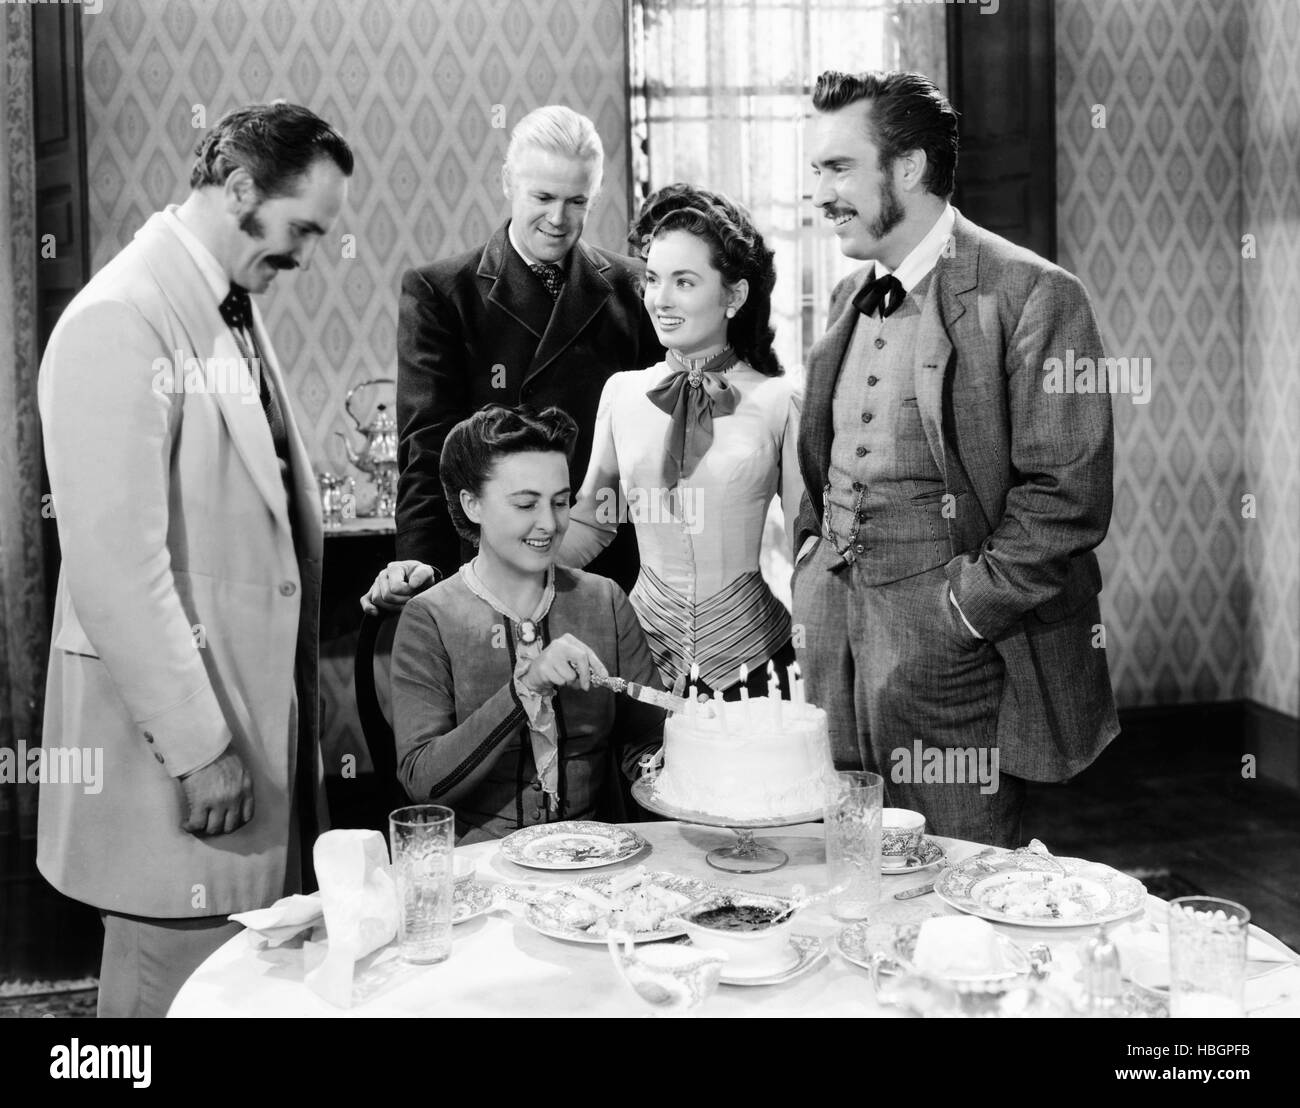 ANOTHER PART OF THE FOREST, from left: Fredric March, Florence Edlridge, Dan Duryea (rear), Ann Blyth, Edmond O'Brien, 1948 Stock Photo